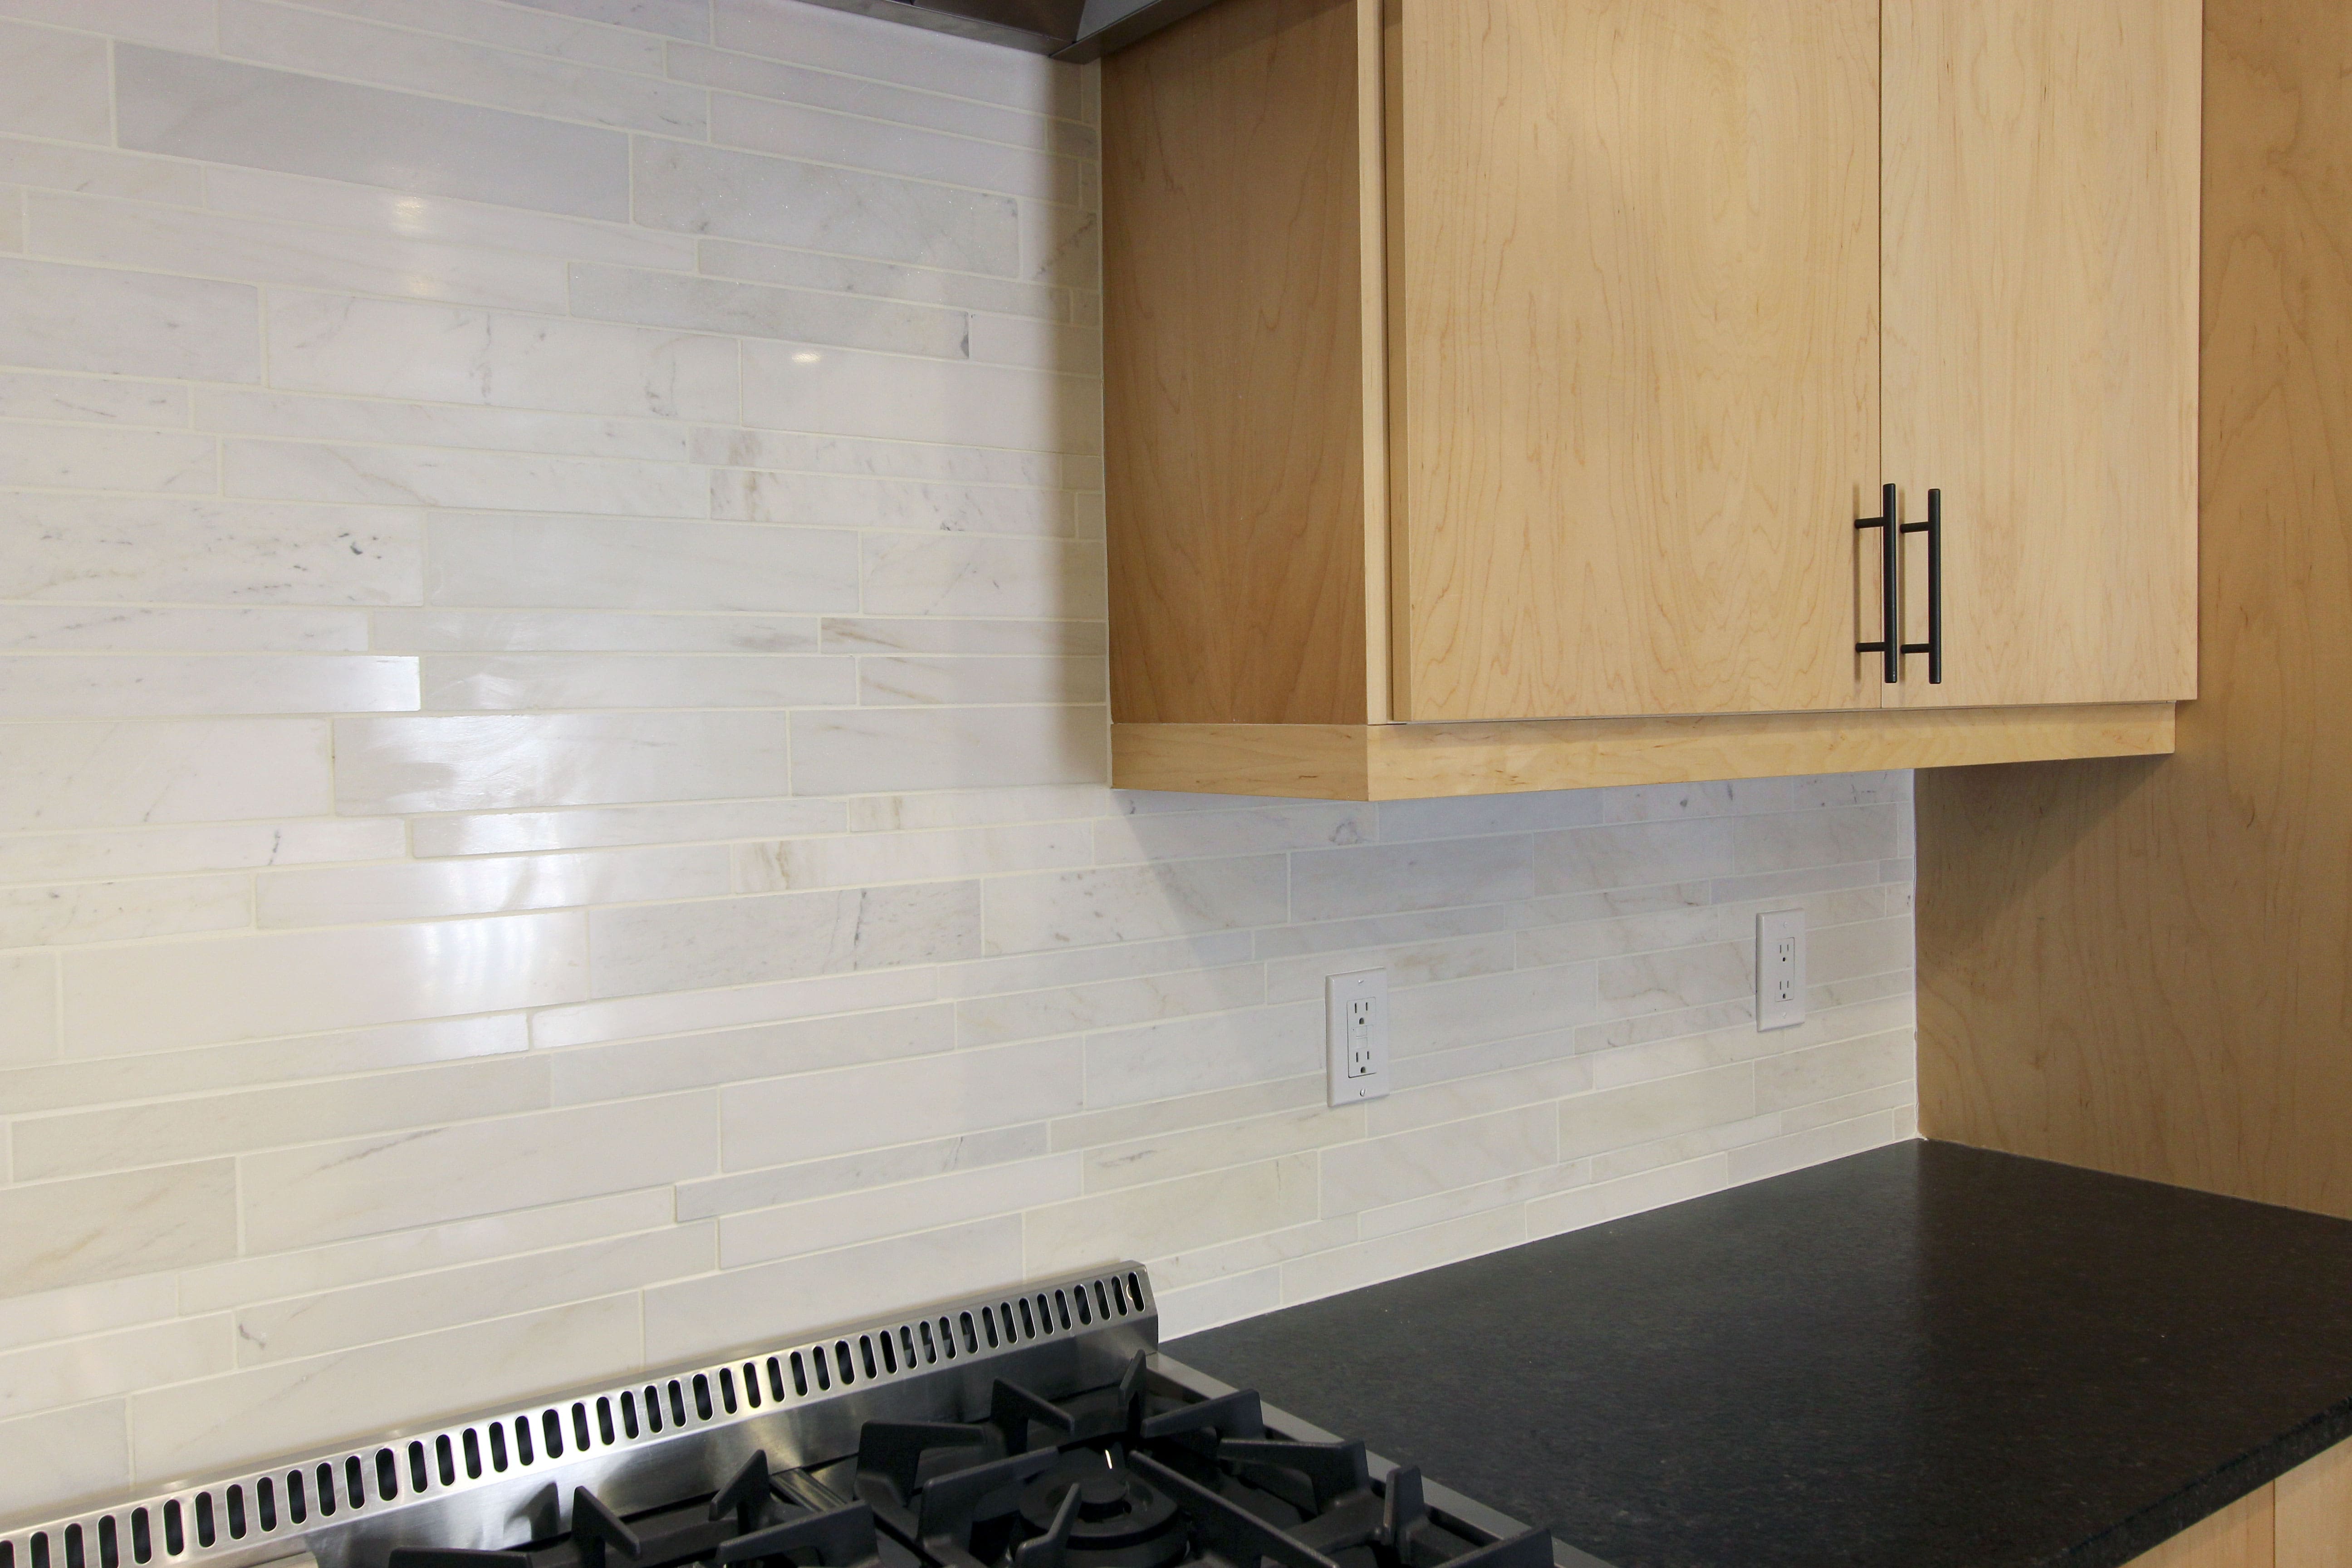 Norstone White Marble Lynia Interlocking Tiles used on a kitchen backsplash showing electric outlets extended out against the tile